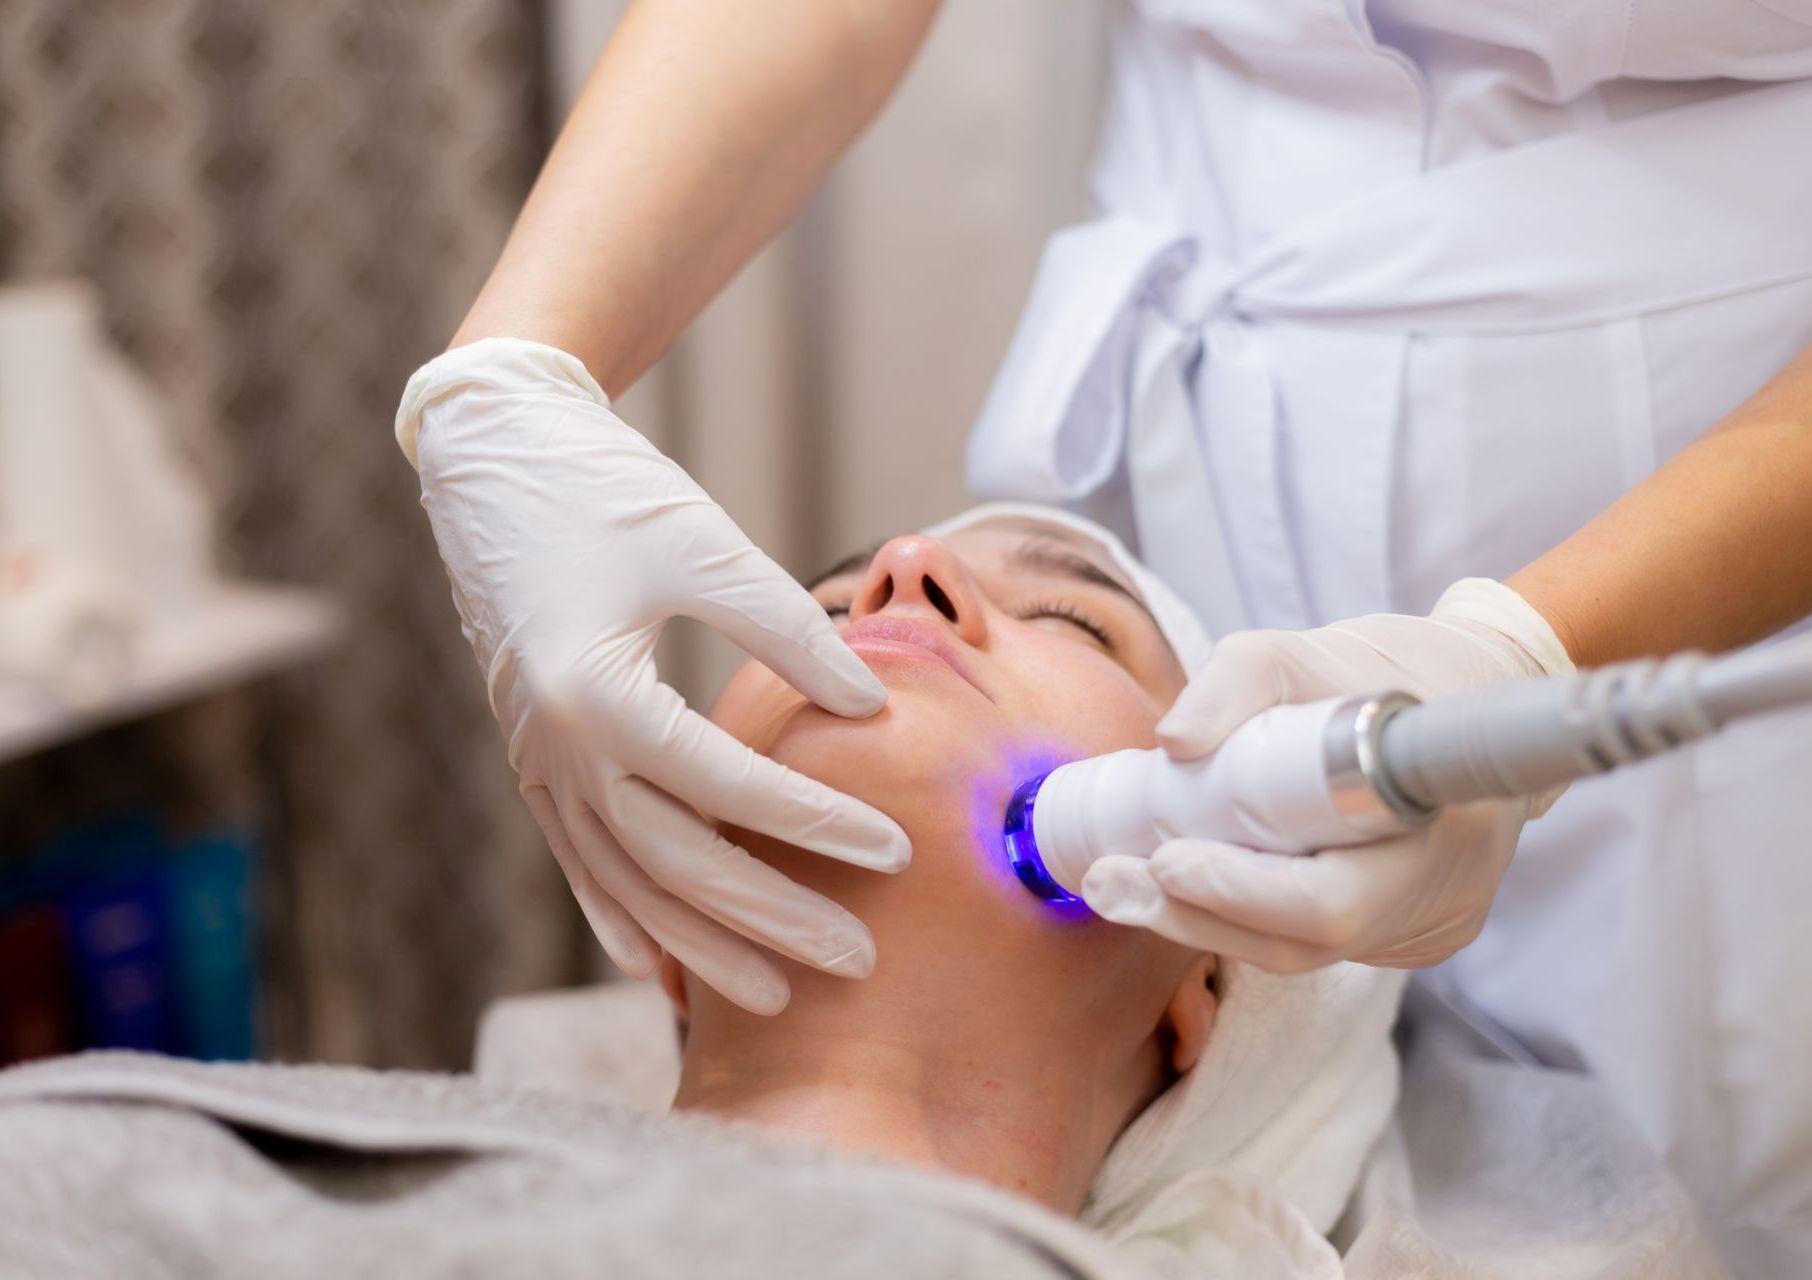 Photofacial being performed on a woman